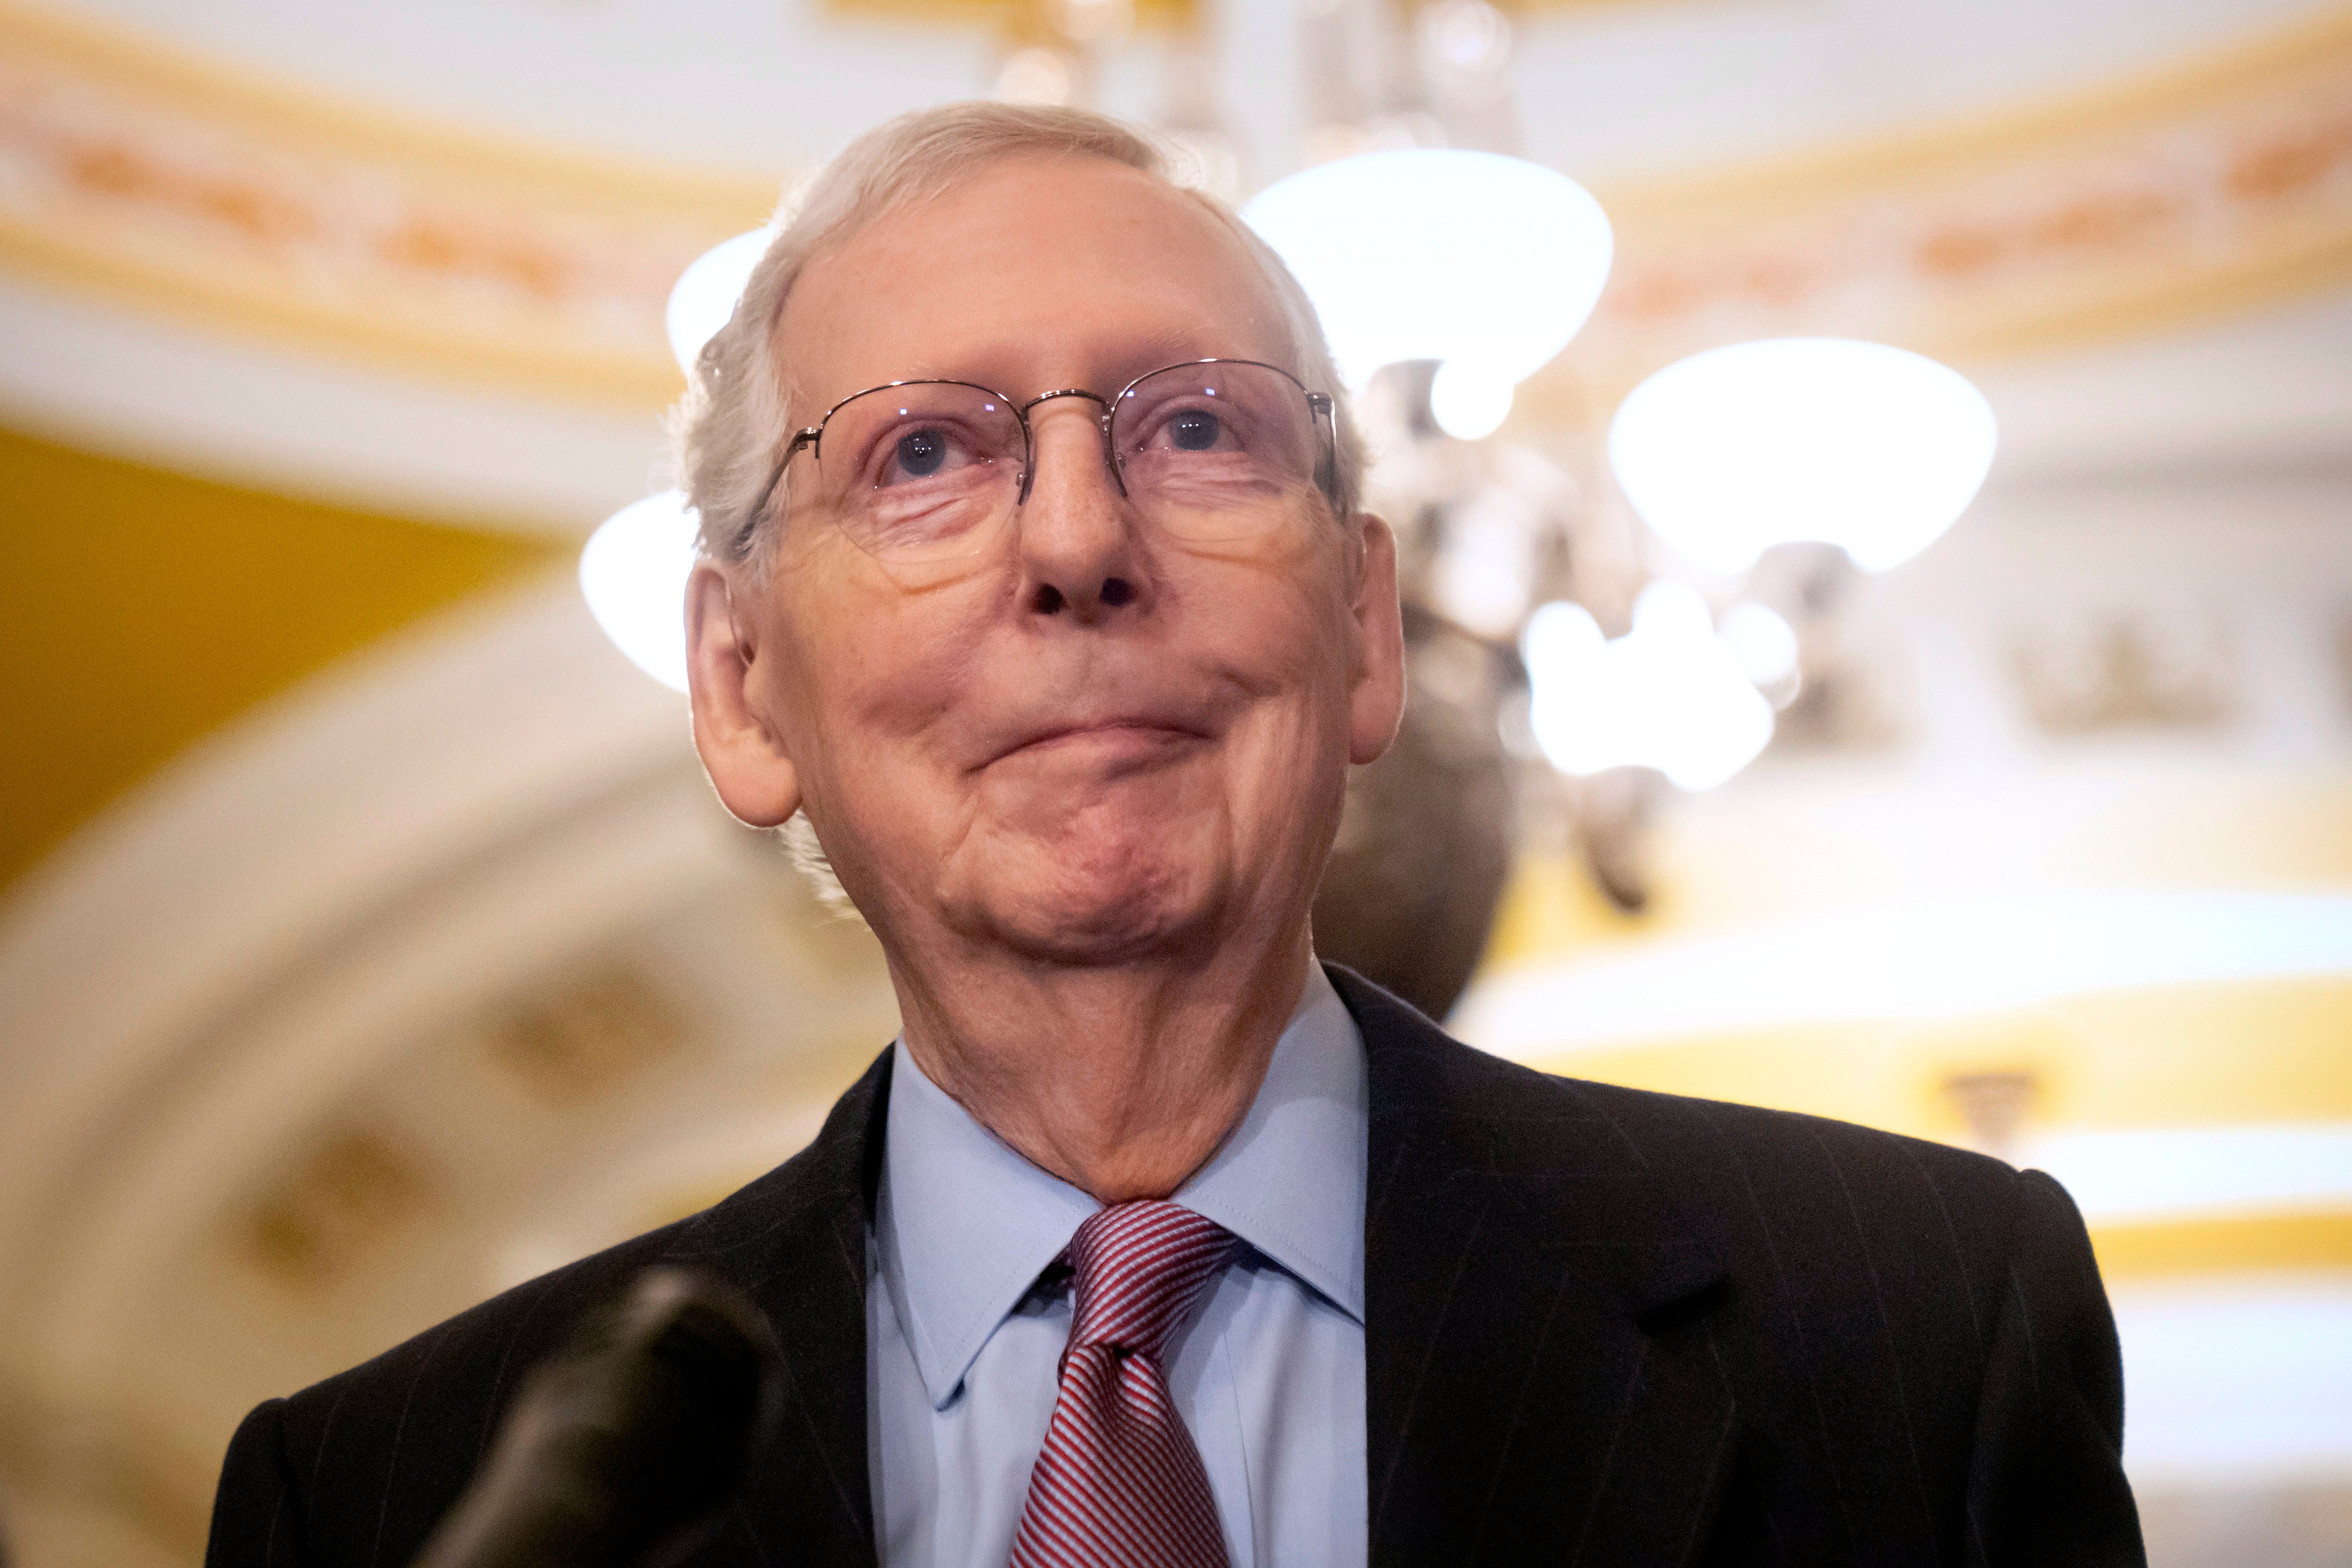 Senate Minority Leader and Kentucky Senator Mitch McConnell (pictured) said on Thursday that he believed US presidents should be held accountable for any criminal actions - but added that accountability has limits